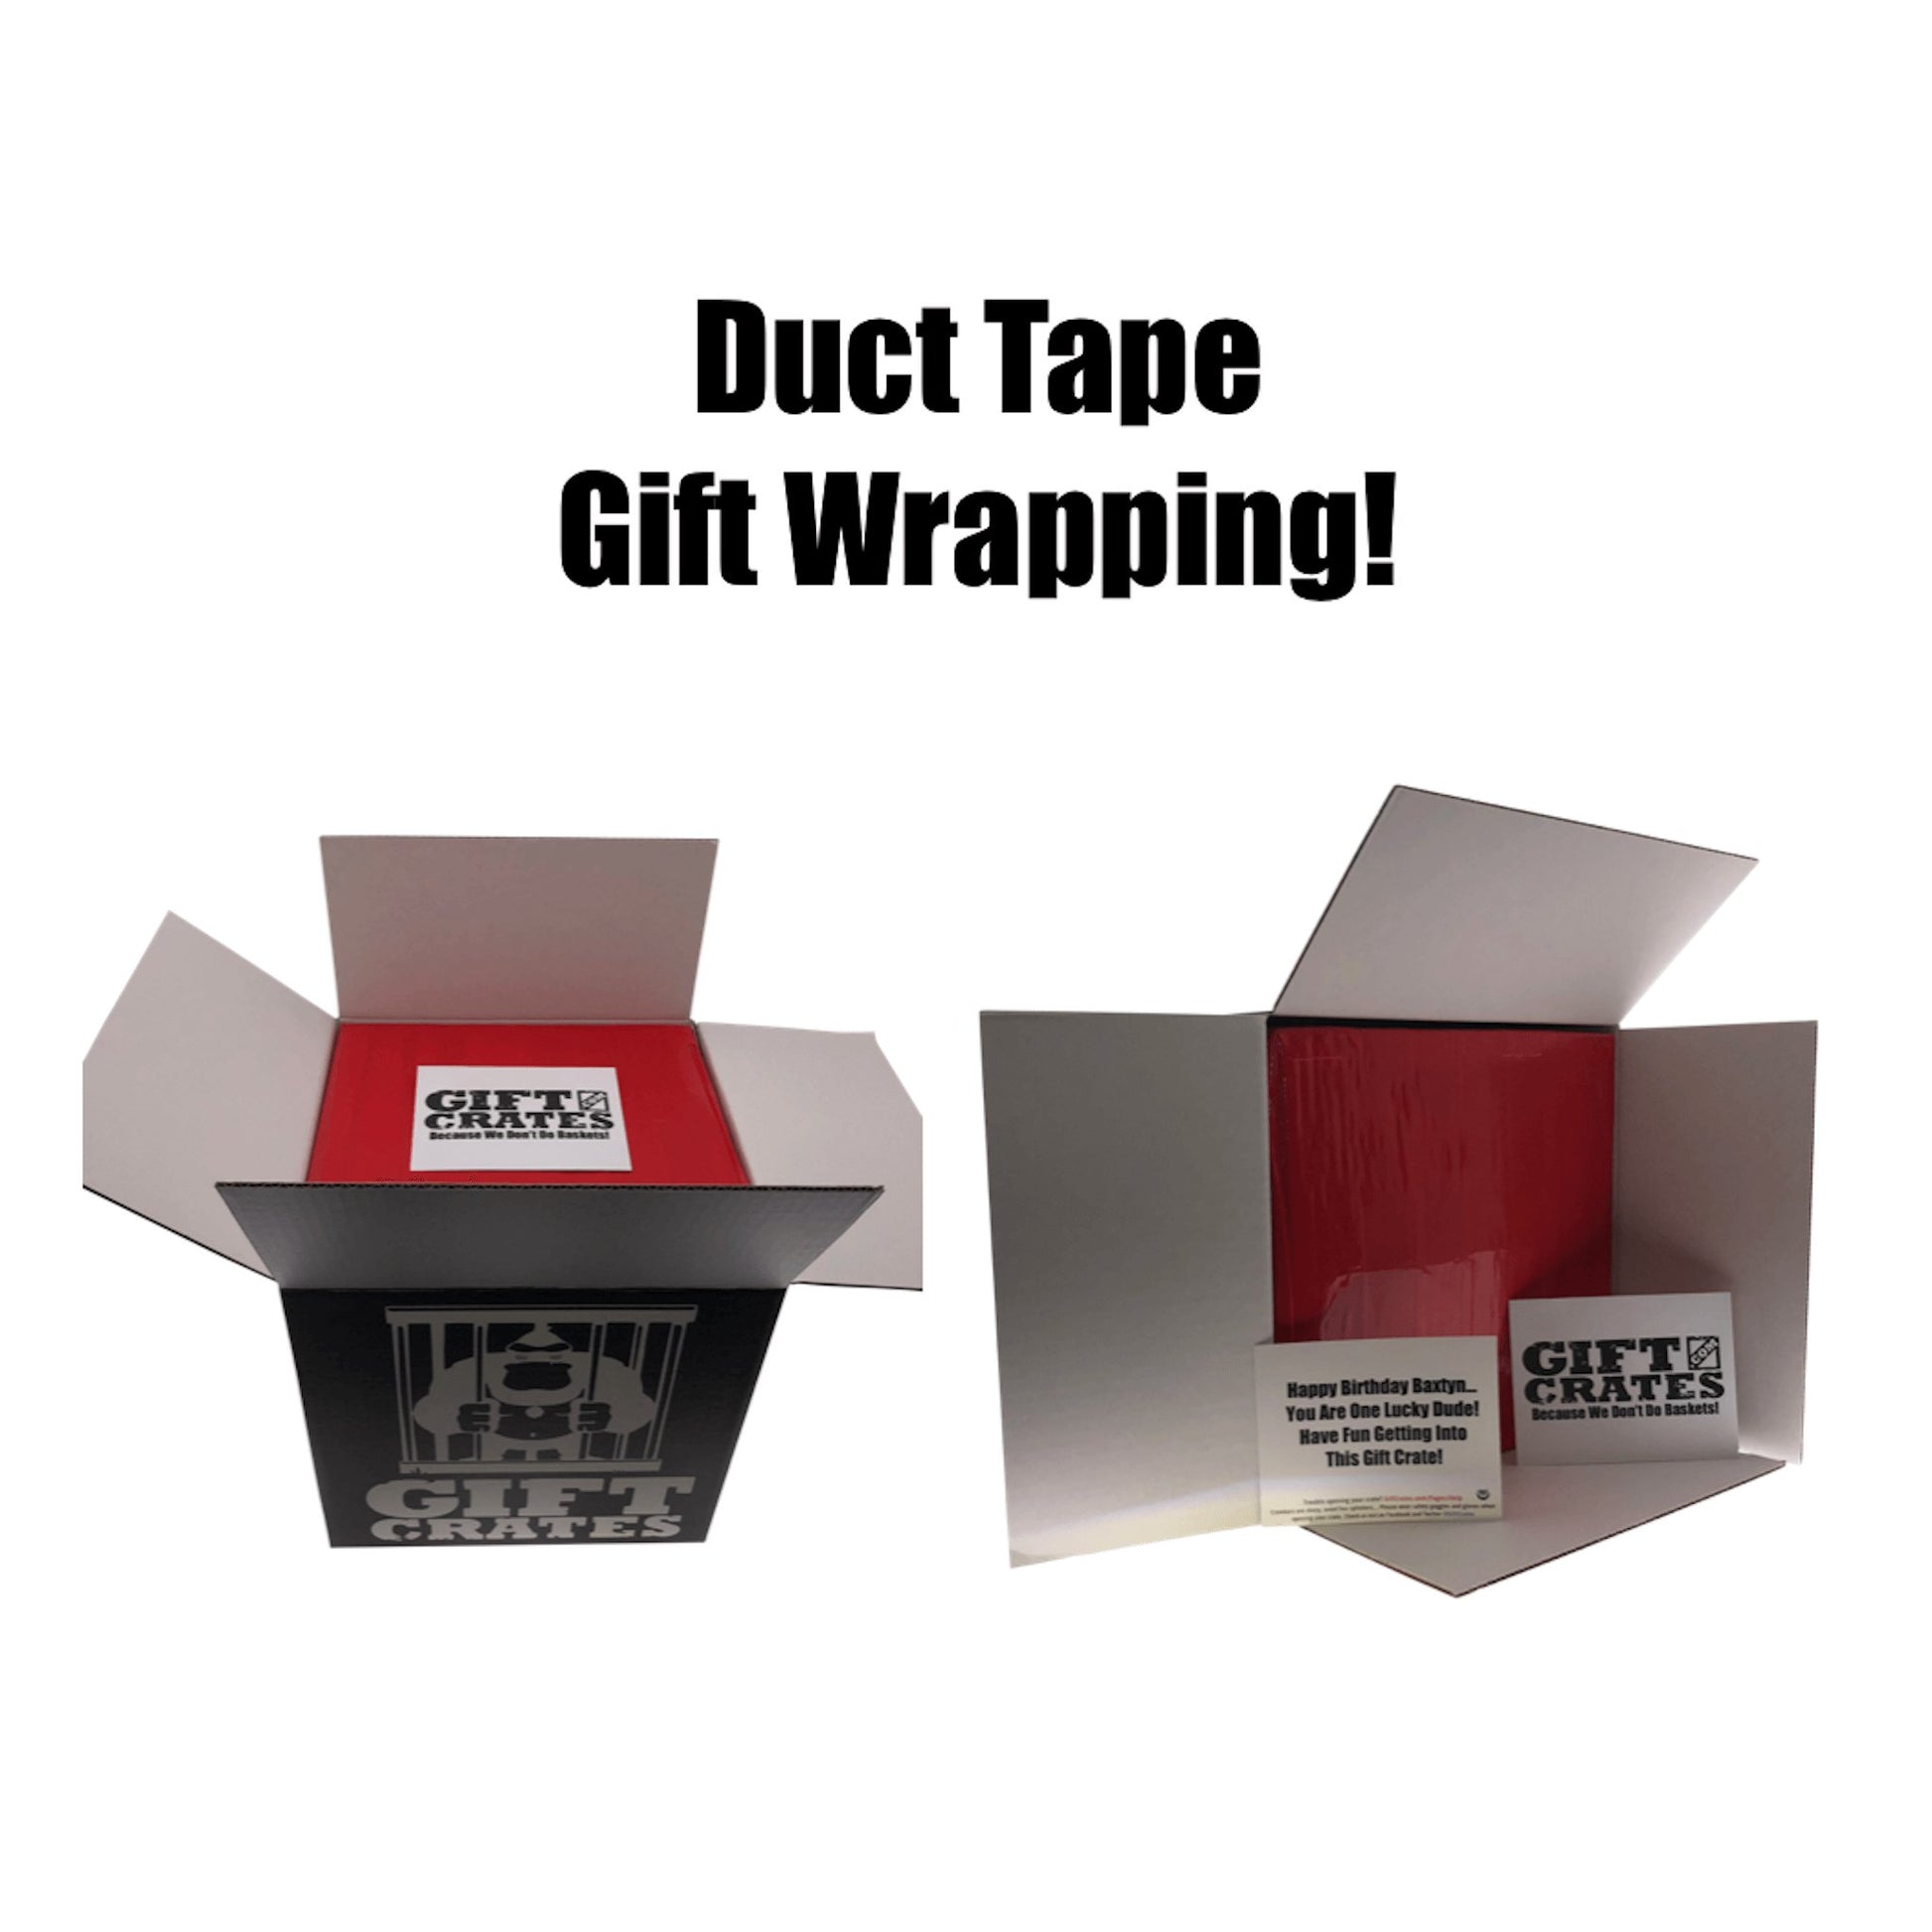 Bacon Gift Wrapping Kit (3 pc Set) - Gift Wrap Paper, Tape & Gift